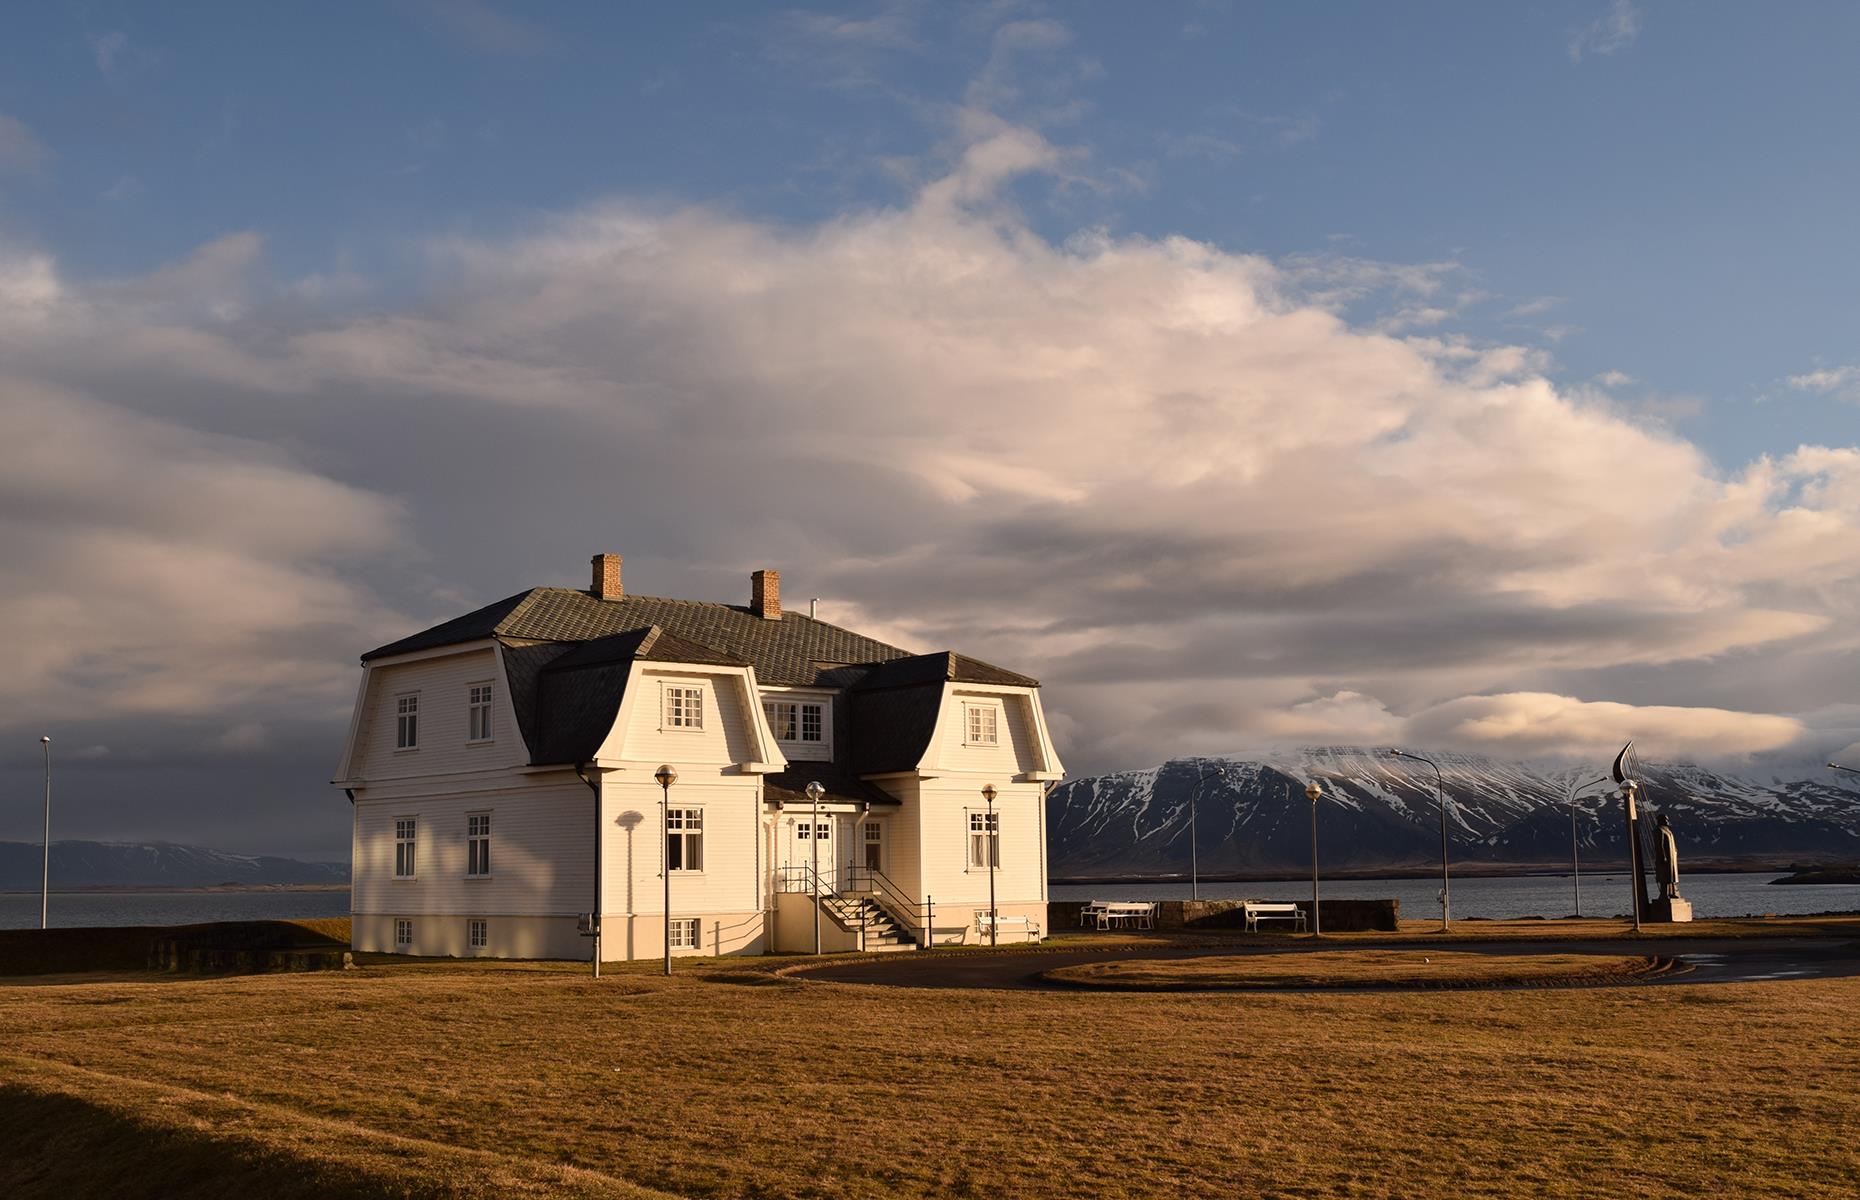 A stark backdrop of mist-clad water and snow-crowned mountains make this isolated house all the more eerie. It was finished in 1909 and has been the site of many important meetings over the years: the most famous was that between US president Ronald Reagan and Soviet Union leader Mikhail Gorbachev in 1986, which was a pivotal step towards the end of the Cold War. But dignitaries have also reported hearing strange sounds and whisperings at the lonely abode over the years.